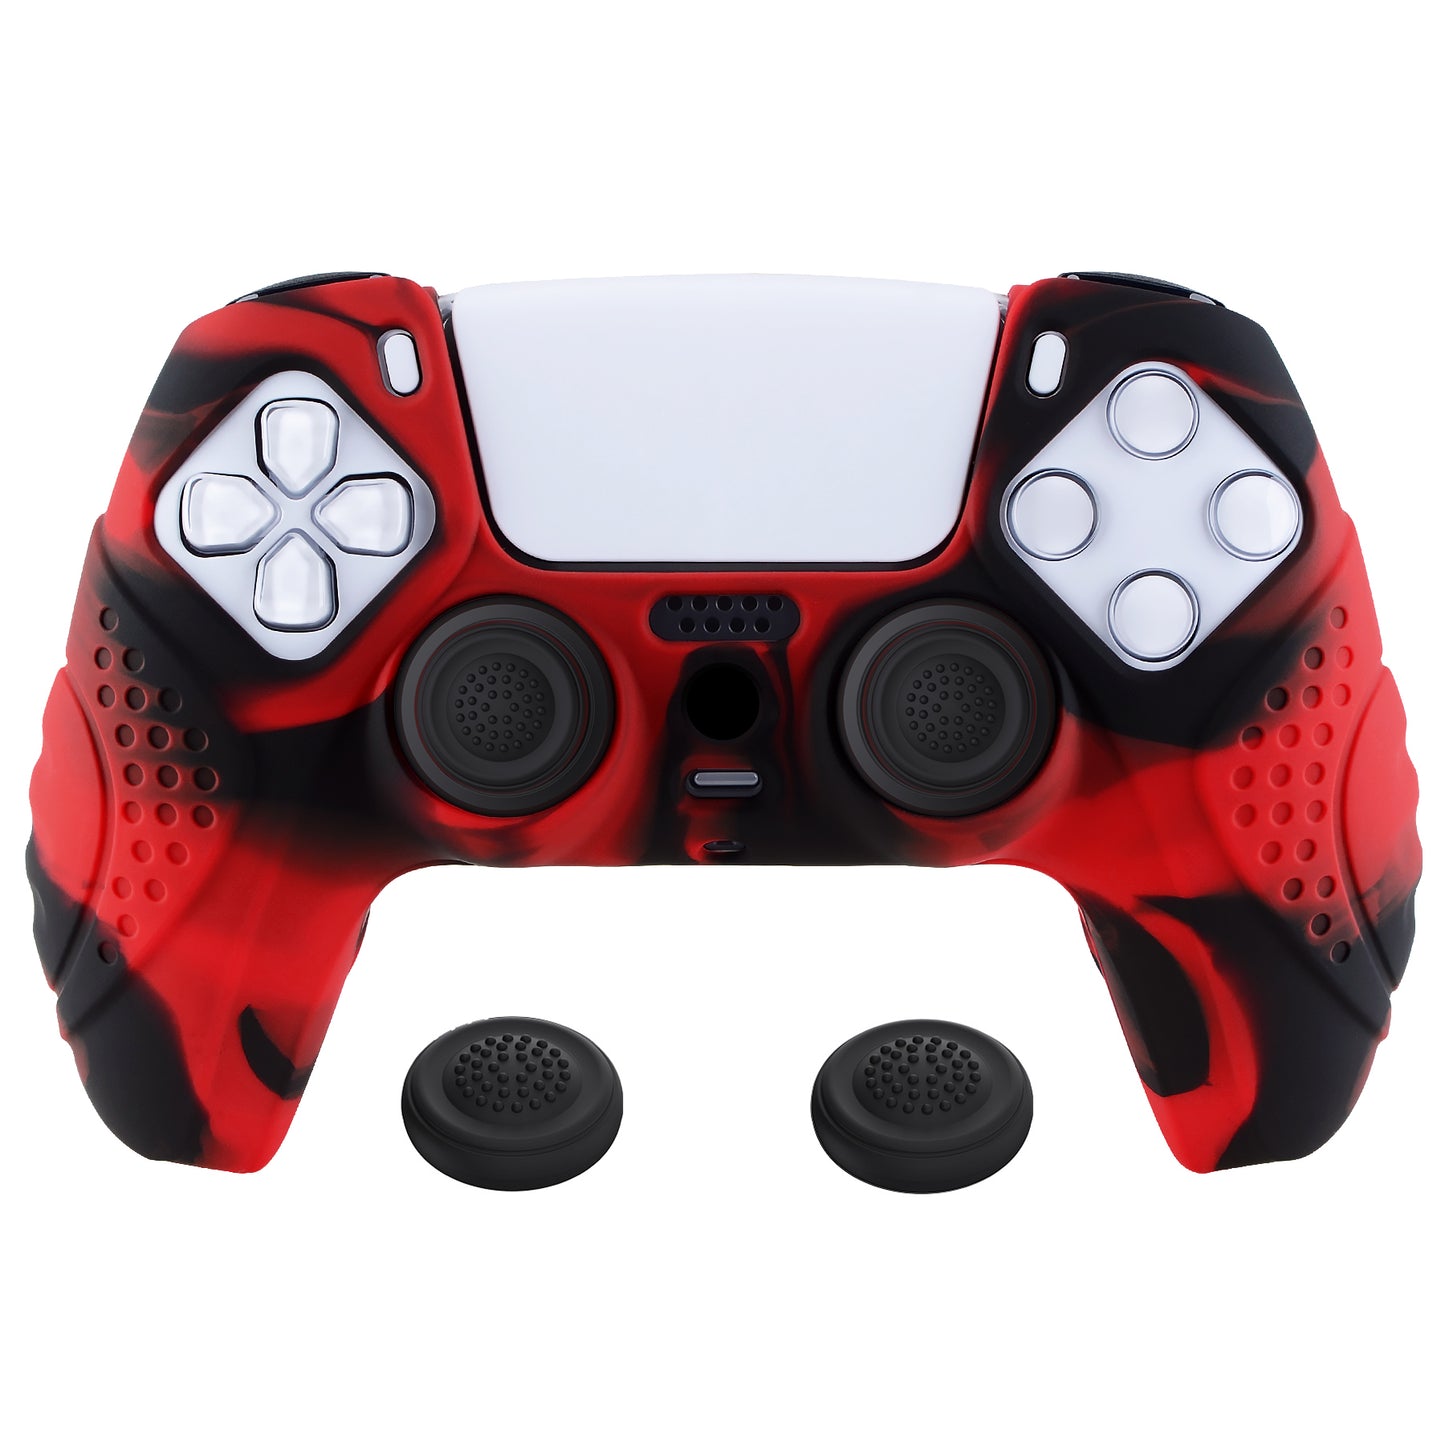 PlayVital Guardian Edition Anti-Slip Silicone Cover Skin with Thumb Grip Caps for PS5 Wireless Controller - Red & Black - YHPF020 PlayVital